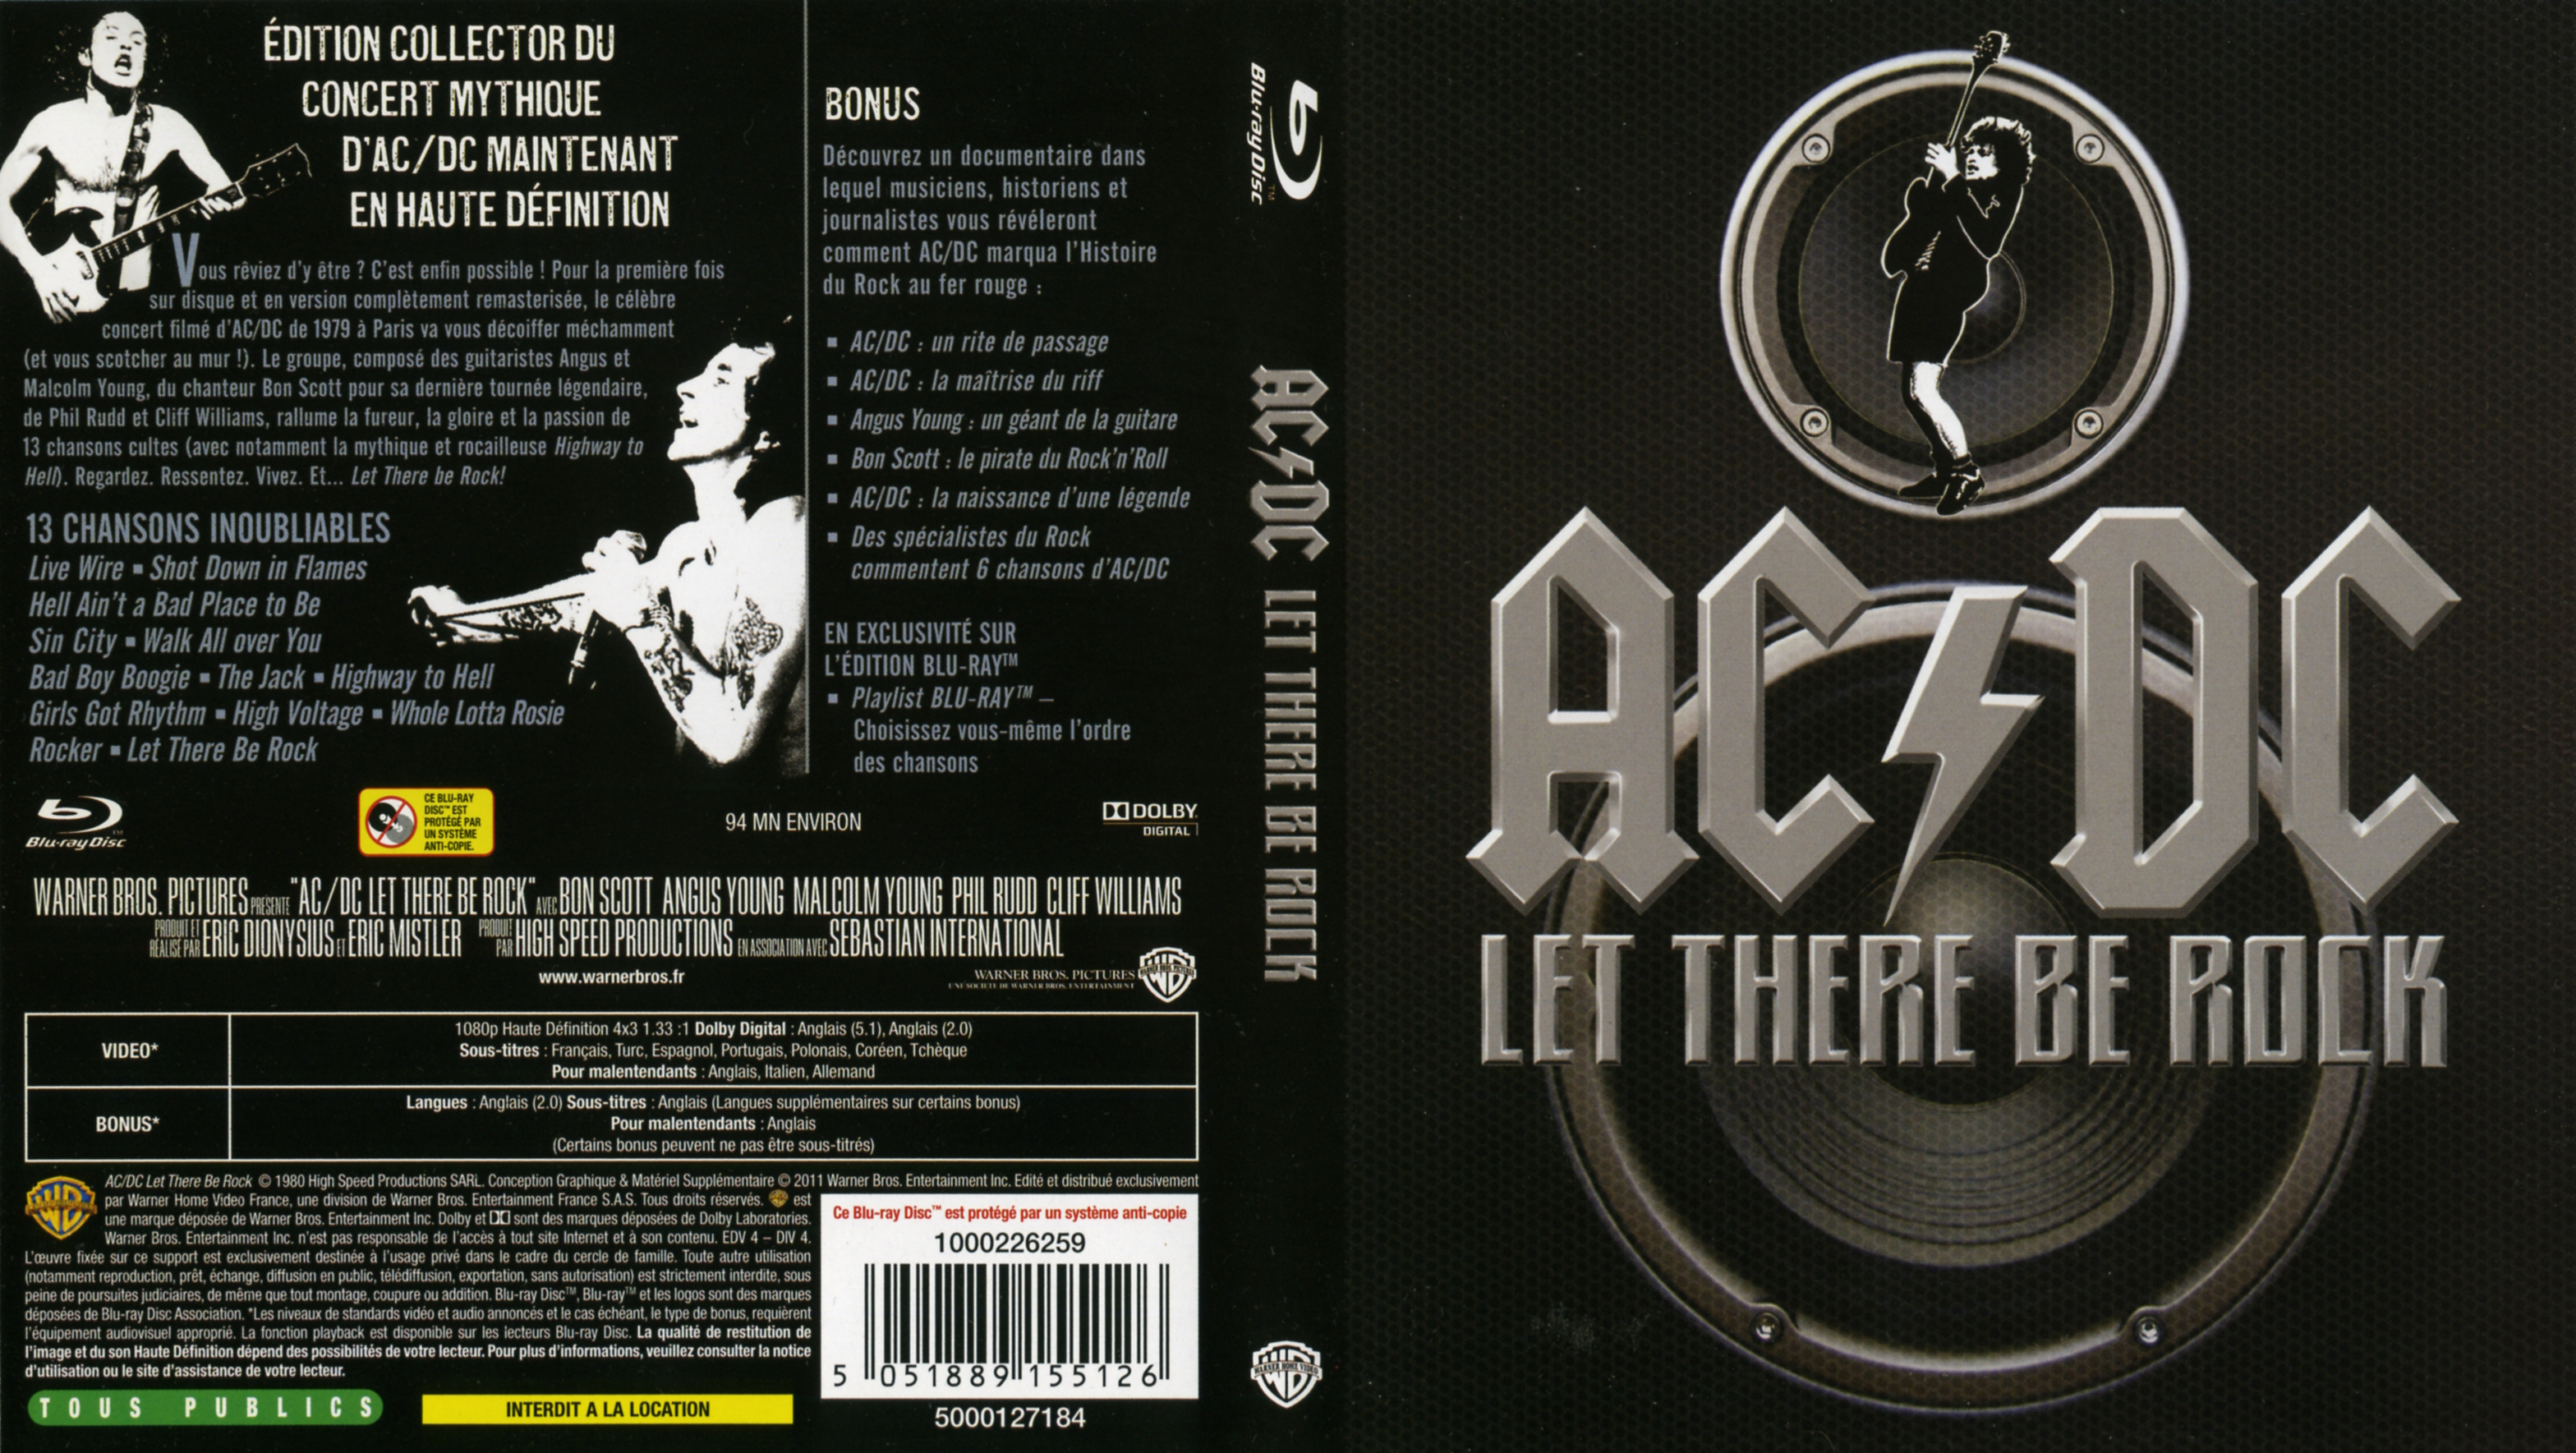 Jaquette DVD ACDC Let there be rock (BLU-RAY)